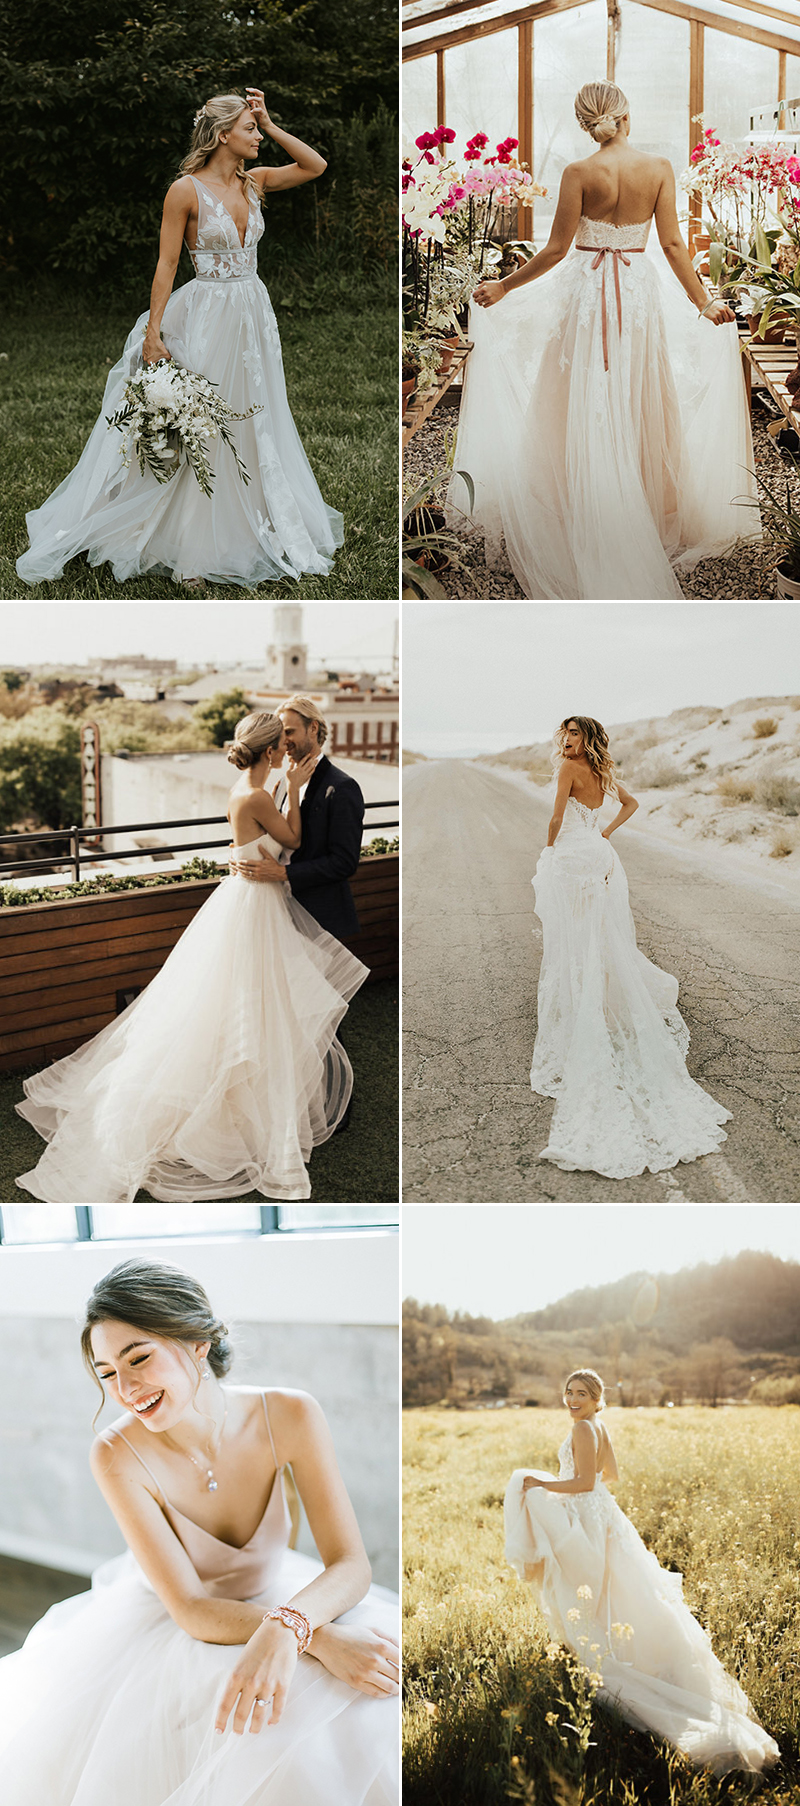 wedding dress styles from real brides - ballgown movement